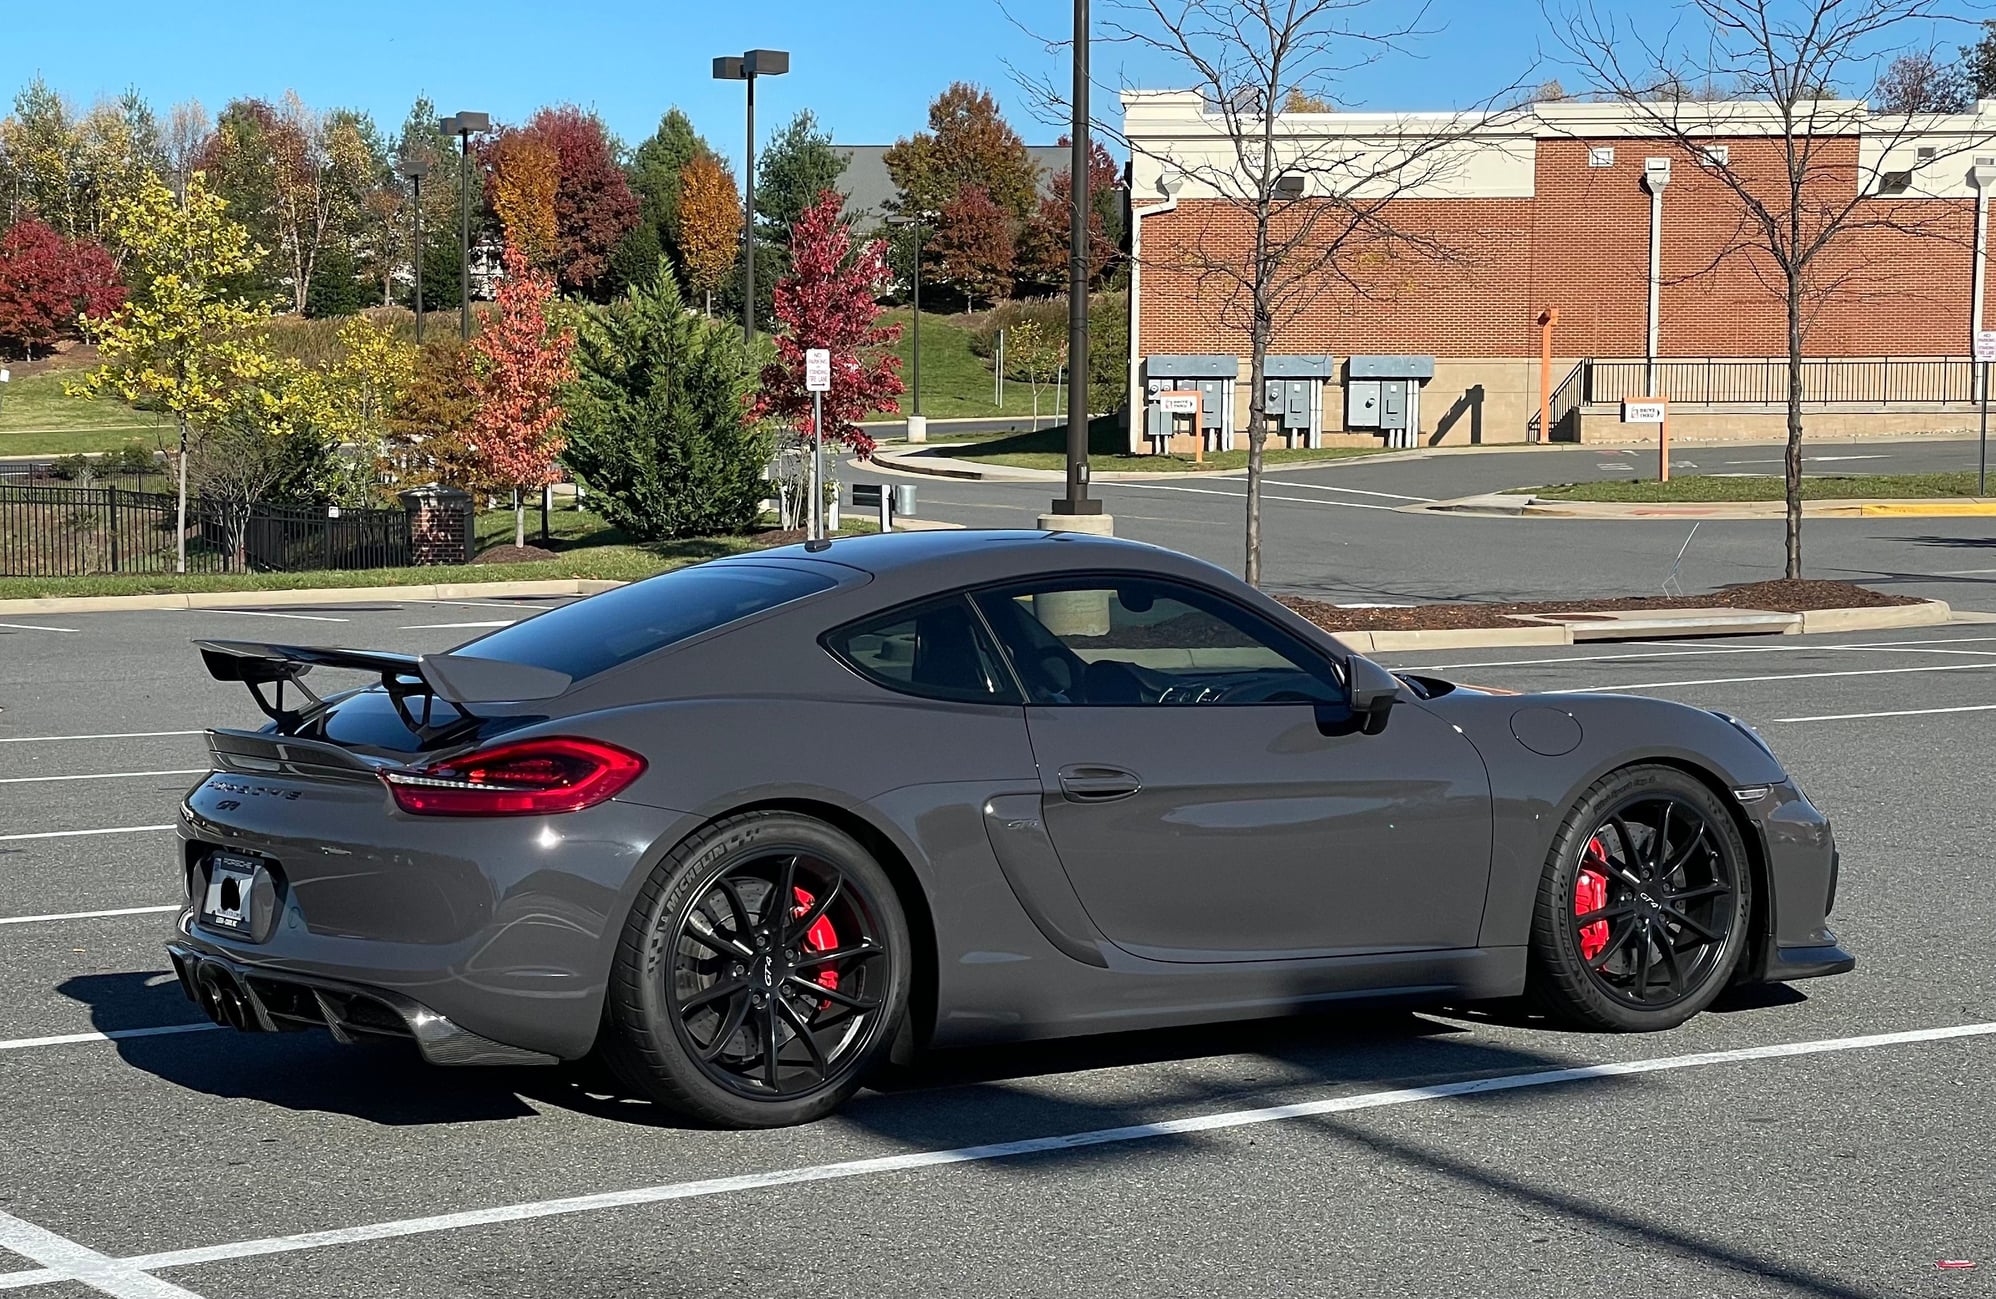 2016 Porsche Cayman GT4 - 1 of 1 PTS Grey-Black 981 GT4 For Sale - Used - VIN WP0AC2A86GK191224 - 19,800 Miles - 6 cyl - 2WD - Manual - Coupe - Other - Haymarket, VA 20169, United States